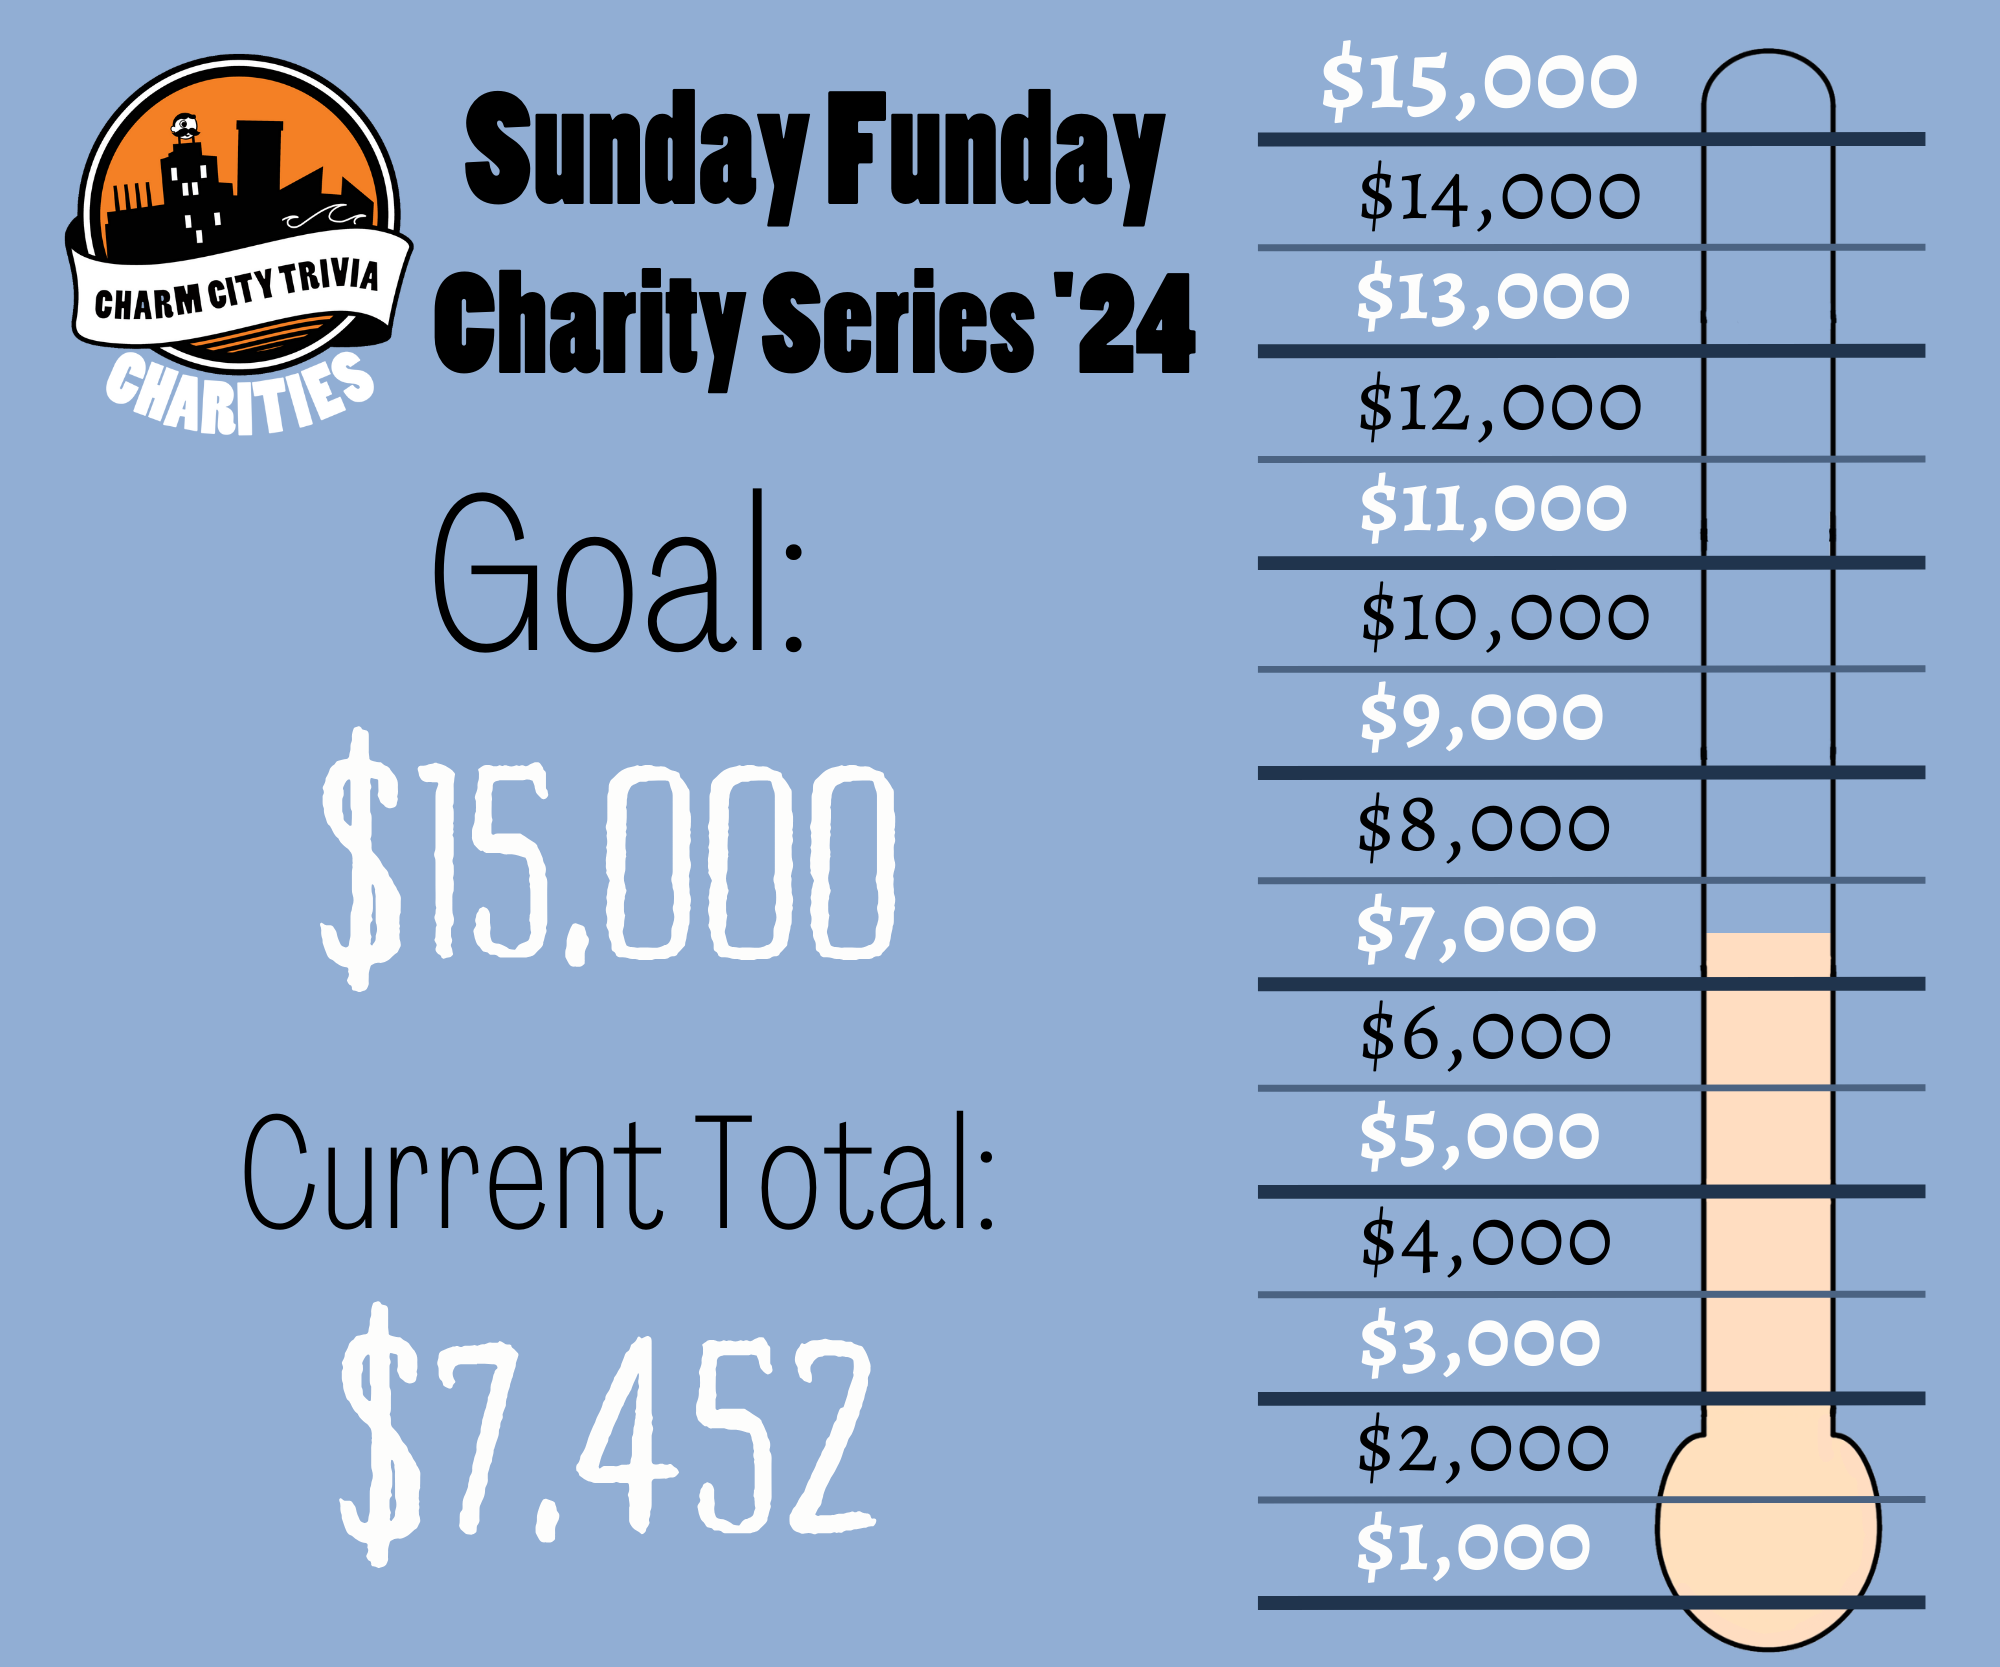 a light blue background with a fundraiser style thermometer, lines separating the thermometer into donation milestones from $1,000 to $15,000, a very light orange bar inside the thermometer that goes to just under halfway between $7,000 and $8,000, the Charm City Trivia Charities logo, and black and white text. The text reads: Sunday Funday Charity Series '24. Goal: $15,000. Current Total: $7,452.